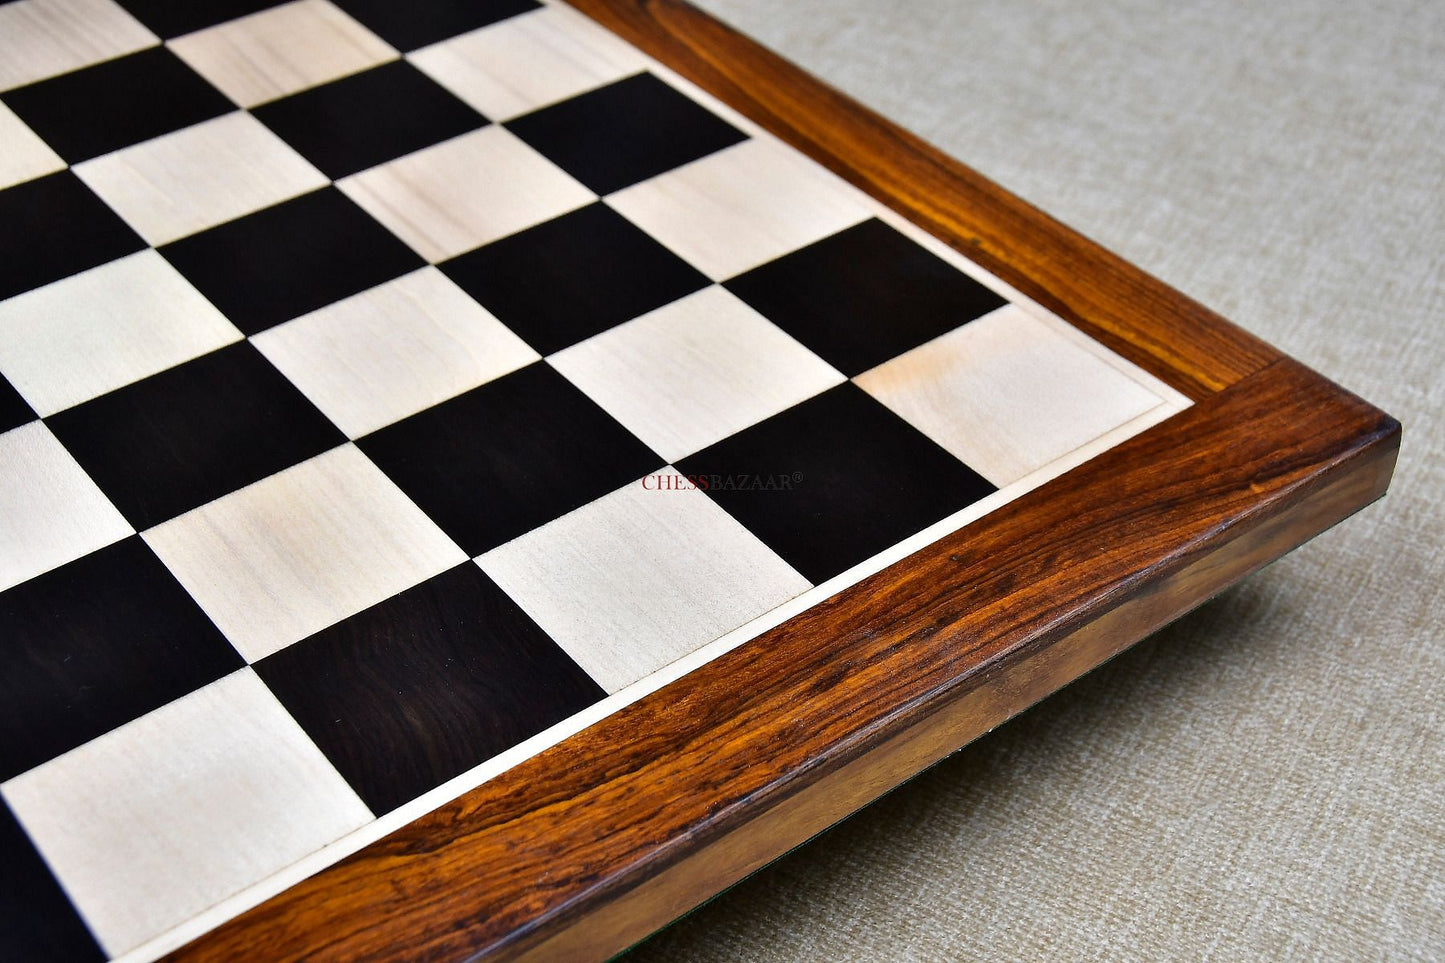 Solid Wooden Indian Chess Board in Genuine Ebony Wood & Maple Wood with Sheesham Wood Border 21" - 55 mm Square